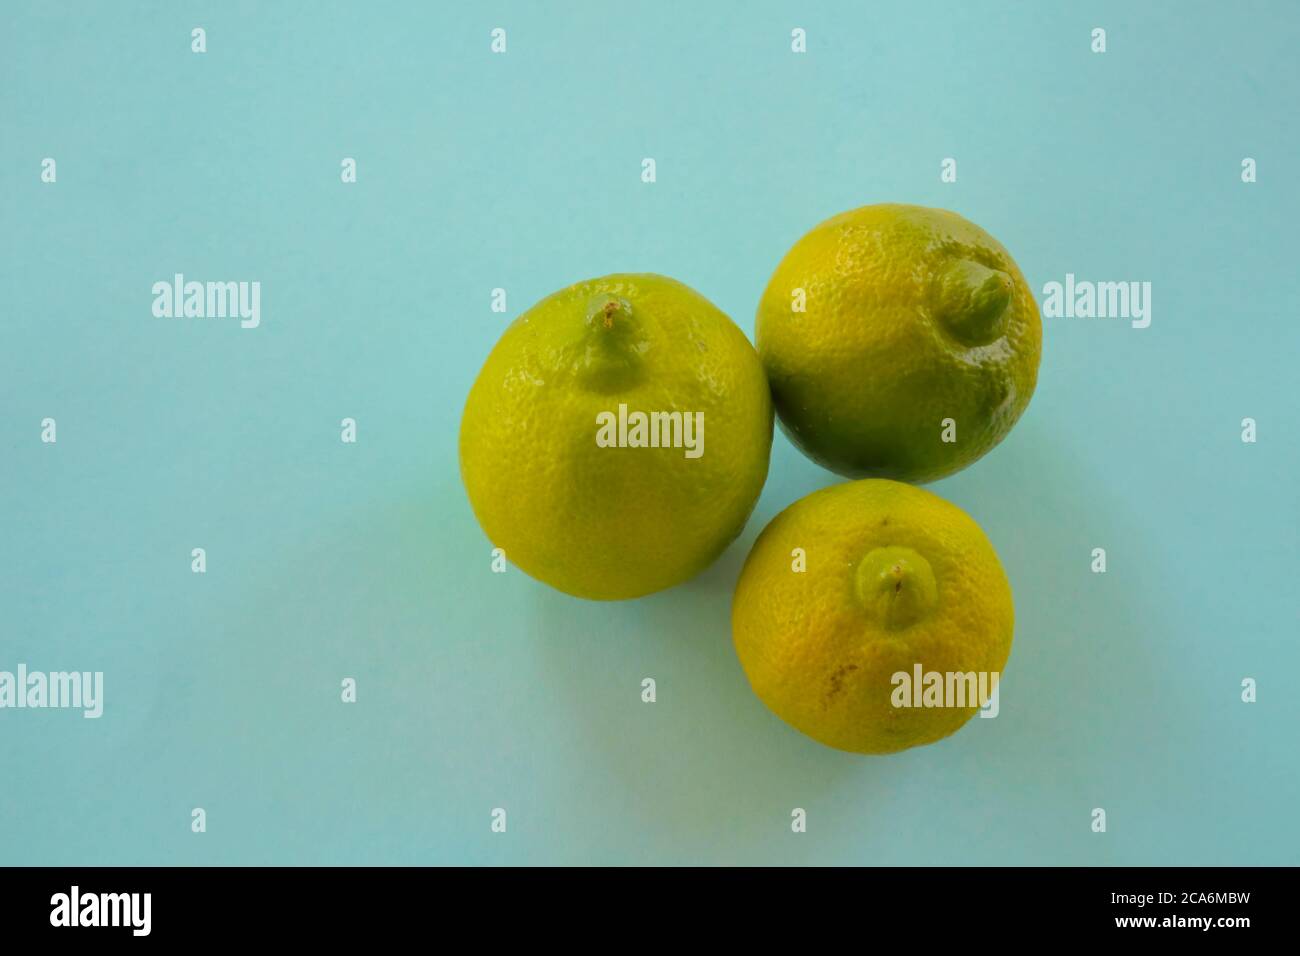 Isolated Mexican Lima, mousambi, common sweet lemon on a teal background, scientific name Citrus limetta Stock Photo